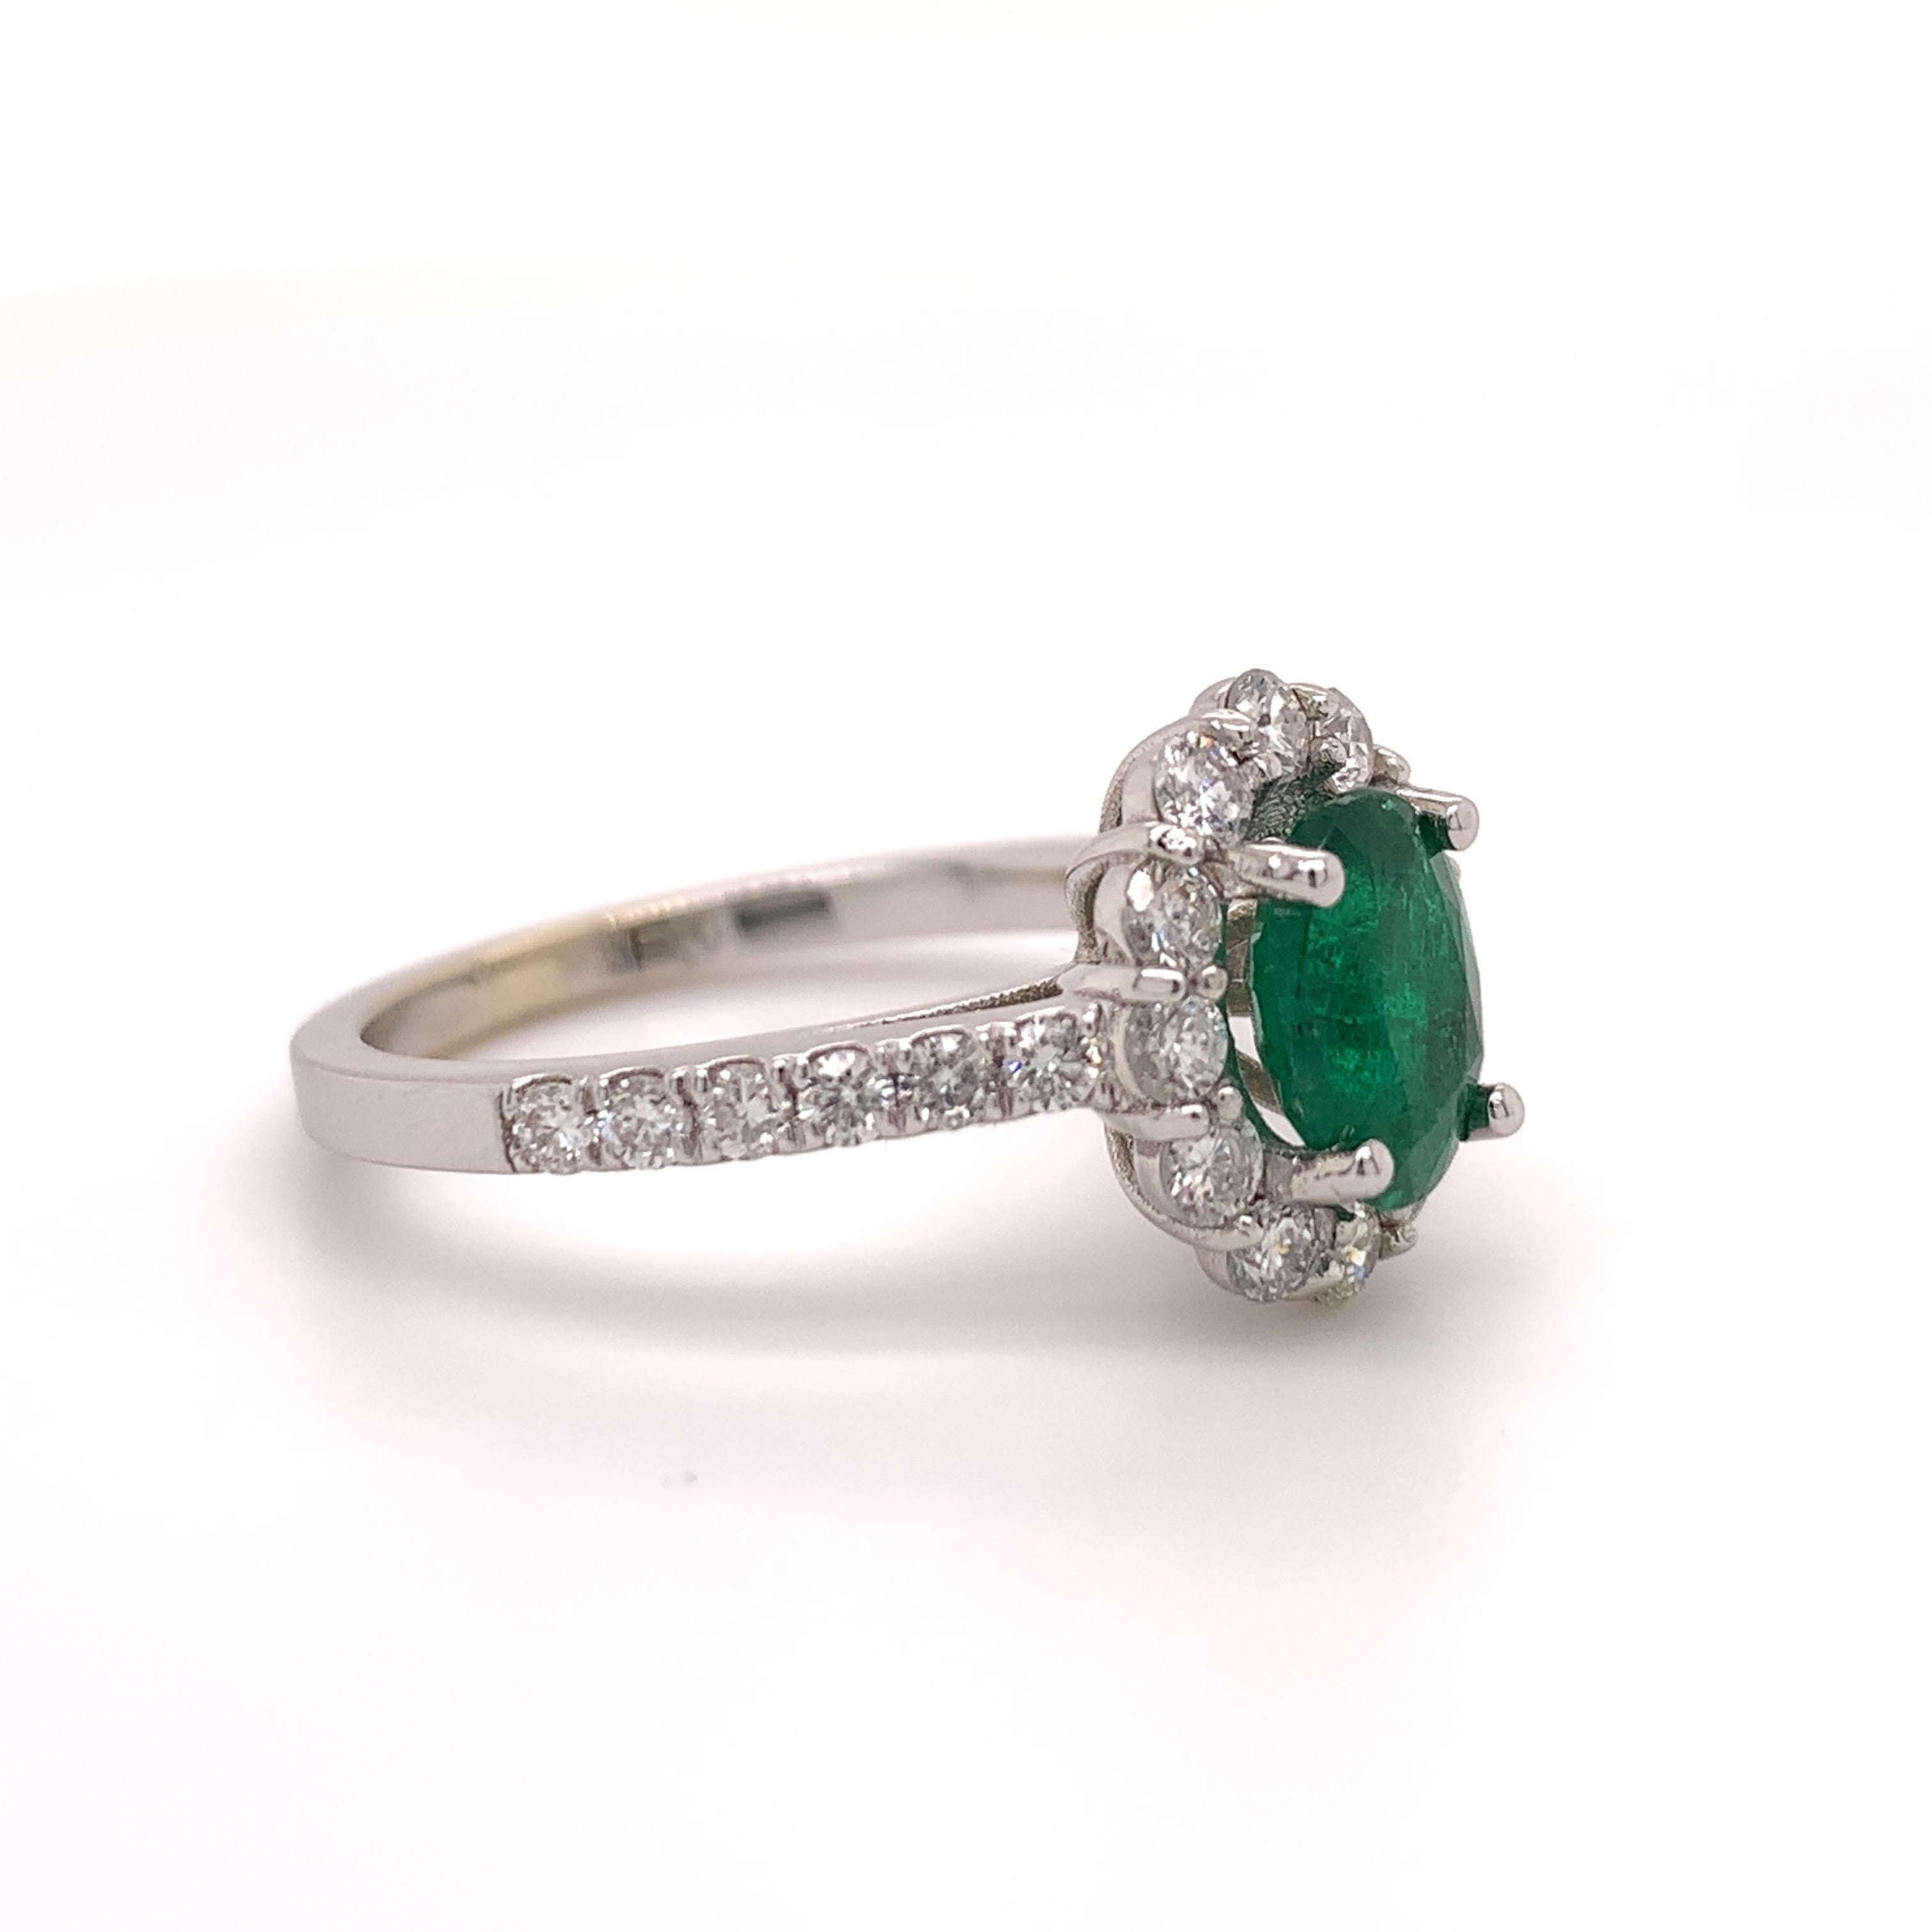 Classic halo design emerald ring. High brilliance, rich green, oval faceted natural 1.10 carats emerald mounted in high profile open basket with four bead prong, accented with round brilliant cut diamonds. Handcrafted classic design set in high